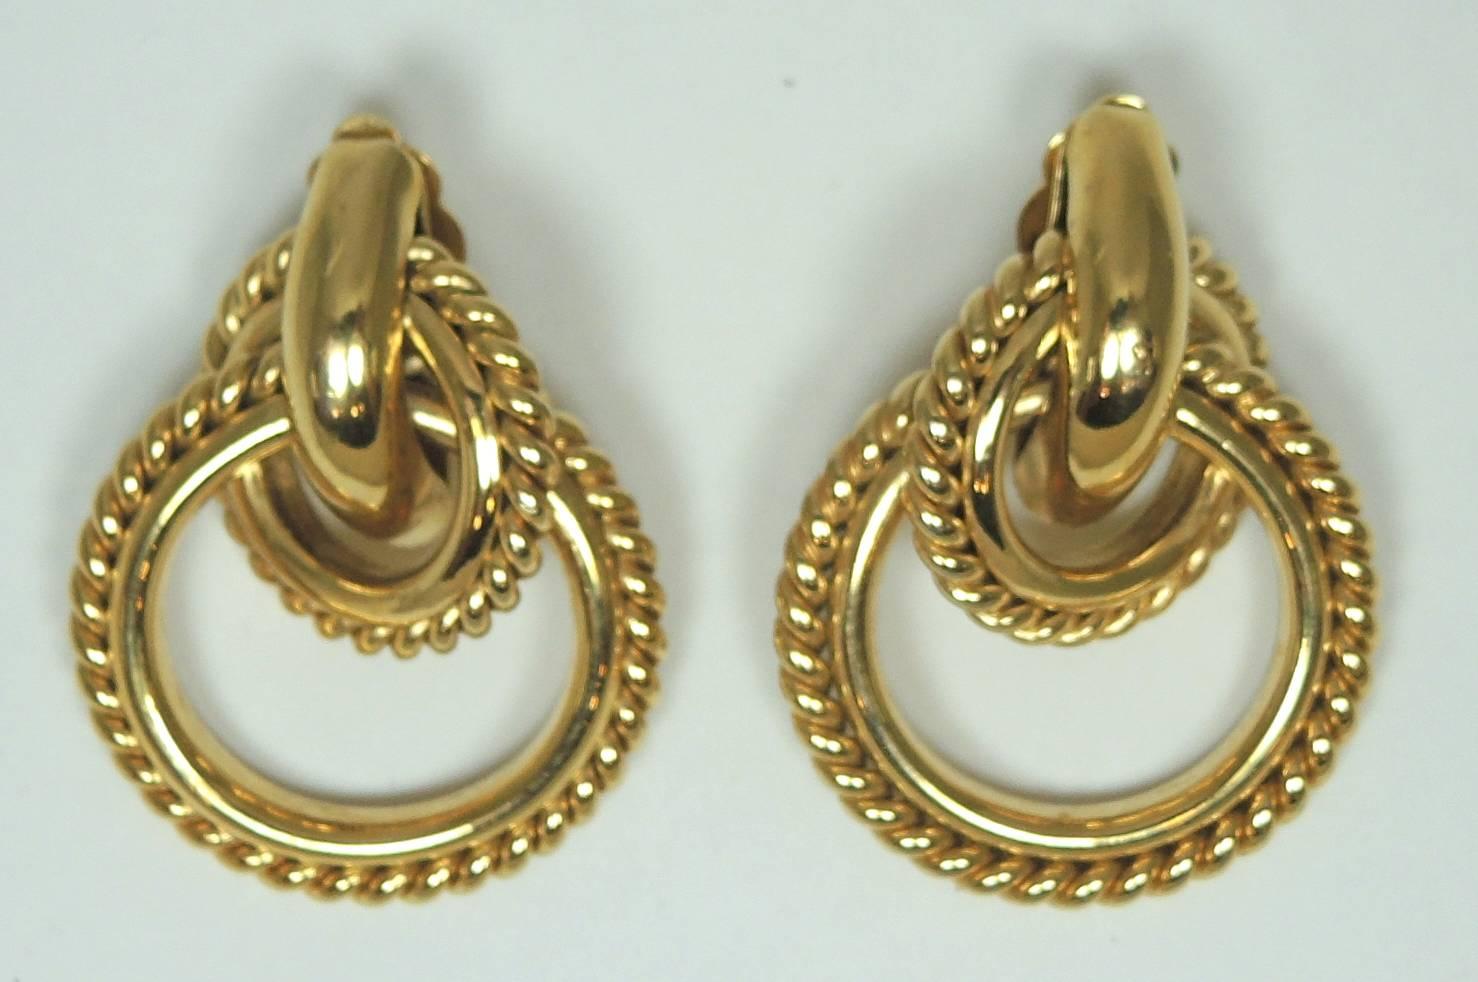 These stunning Givenchy earrings feature a double hoop design in a gold tone setting.  They measure 2” x 1-1/2” and are signed “Givenchy”. They are in excellent condition.